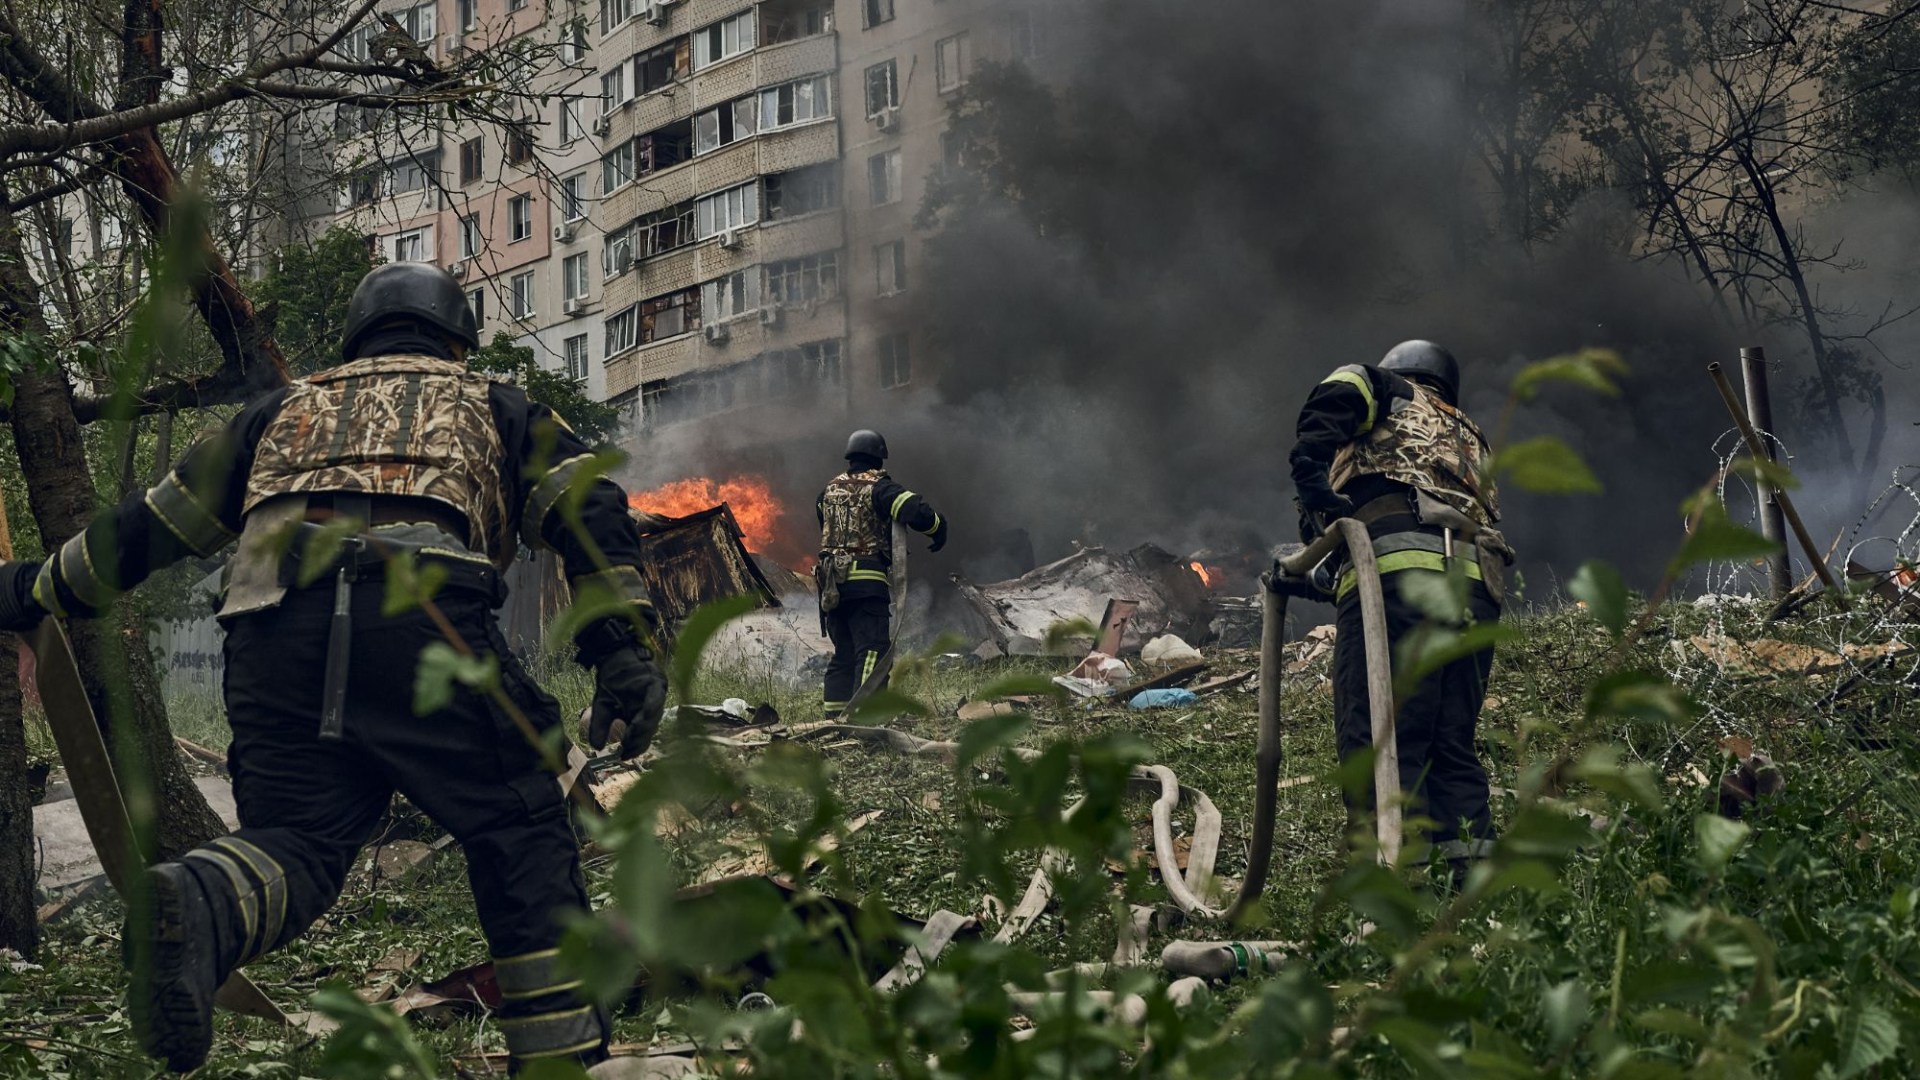 Ukraine’s second largest city Kharkiv is ‘under missile attack’, says mayor as Putin’s forces advance in new offensive [Video]